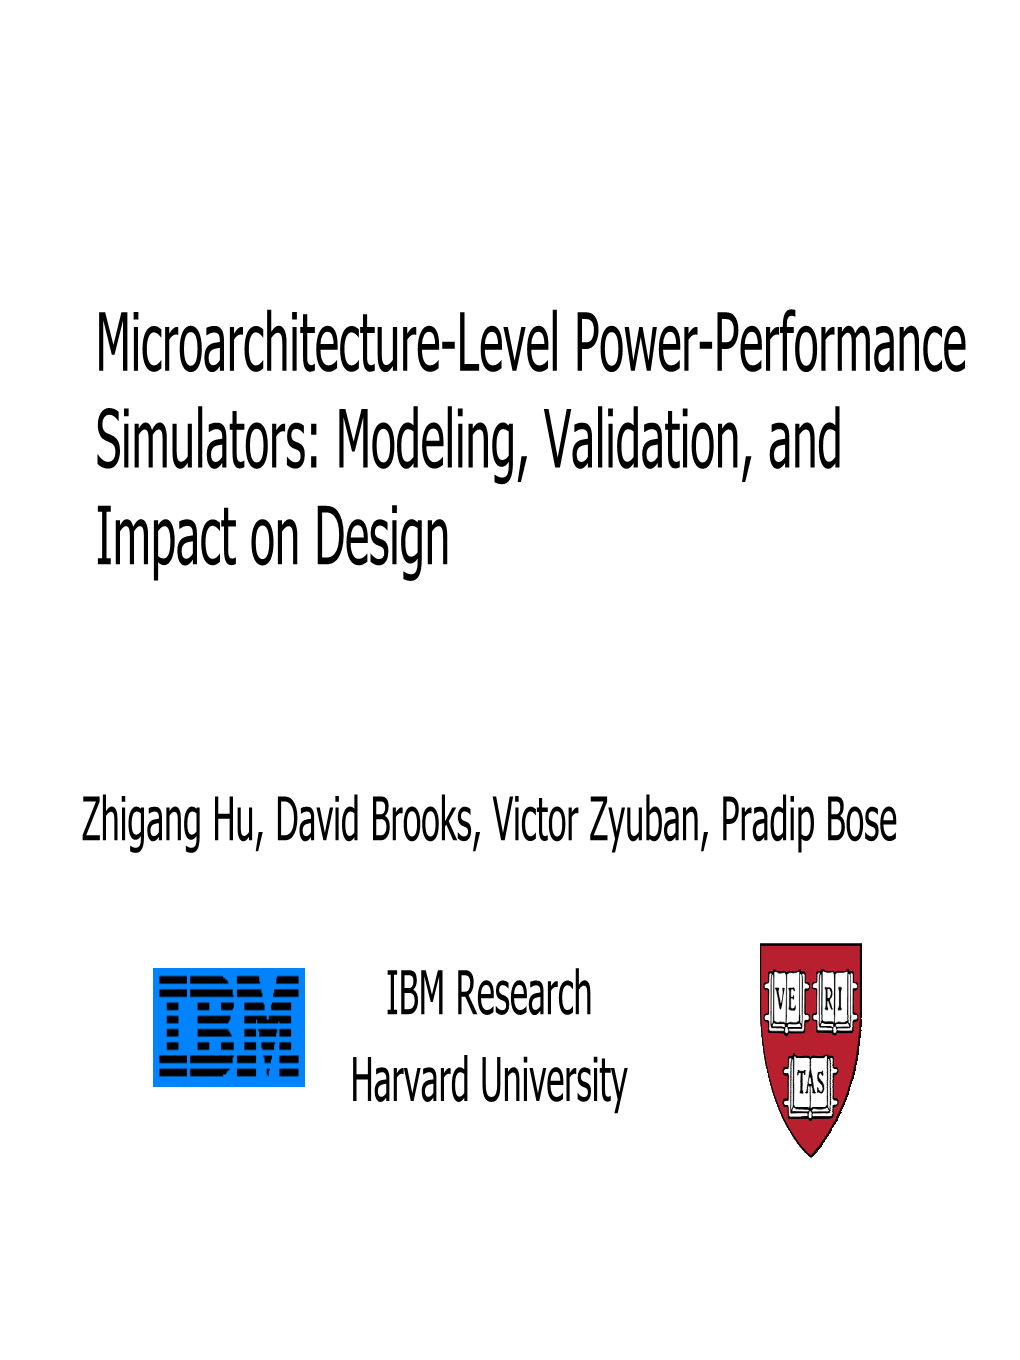 Microarchitecture-Level Power-Performance Simulators: Modeling, Validation, and Impact on Design